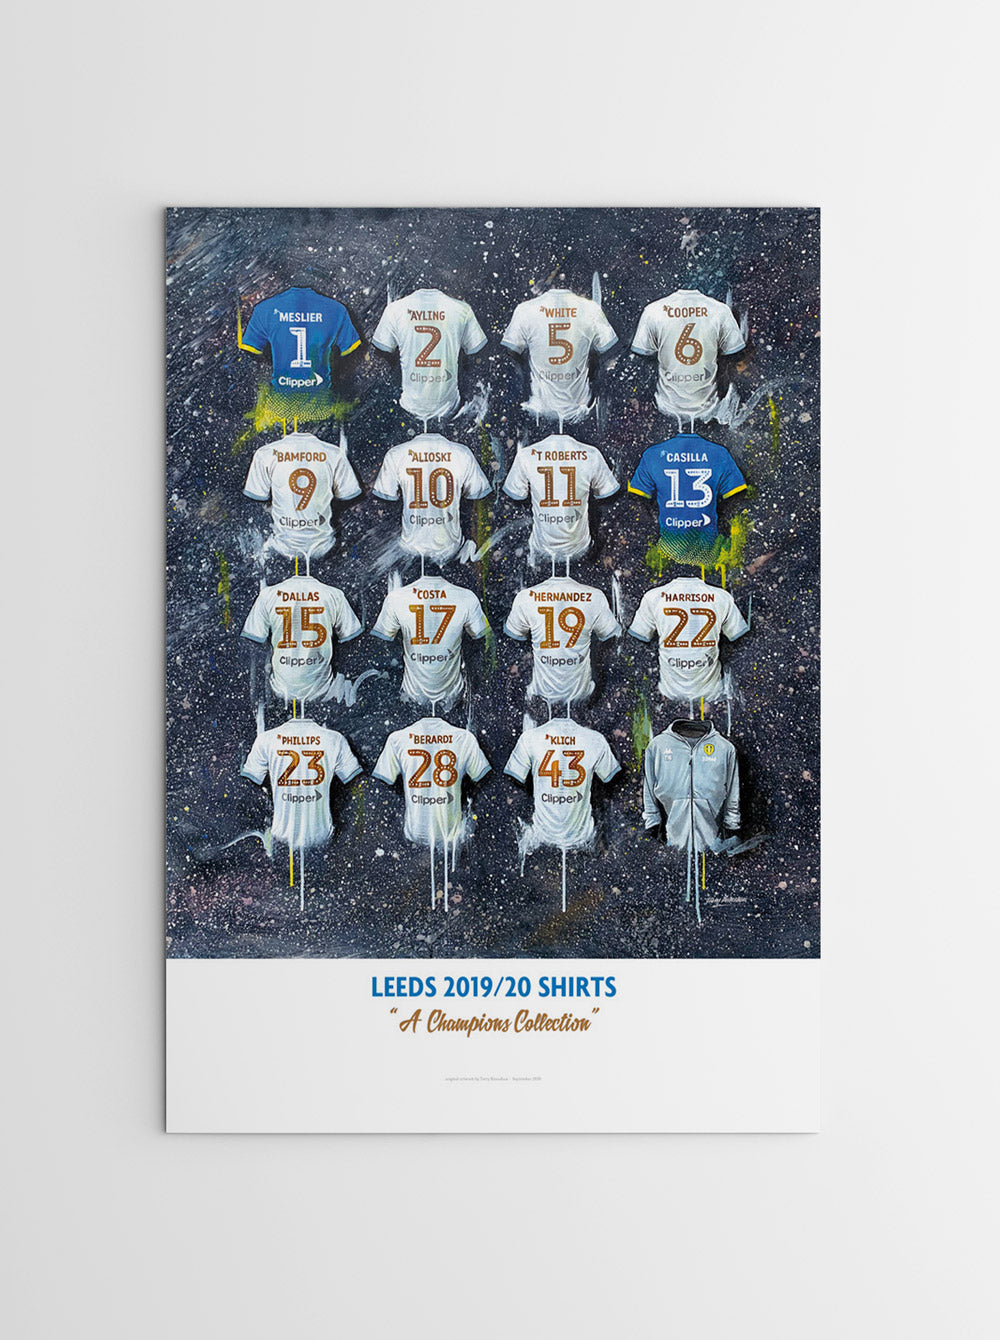 The Leeds Champions Personalised A2 limited edition print artwork by Terry Kneeshaw showcases 16 iconic team shirts. The artwork includes the historic jersey from the 2019/20 Championship team. Fans can personalize the artwork to include their name or a special message. This limited edition print is a must-have for all Leeds United supporters.